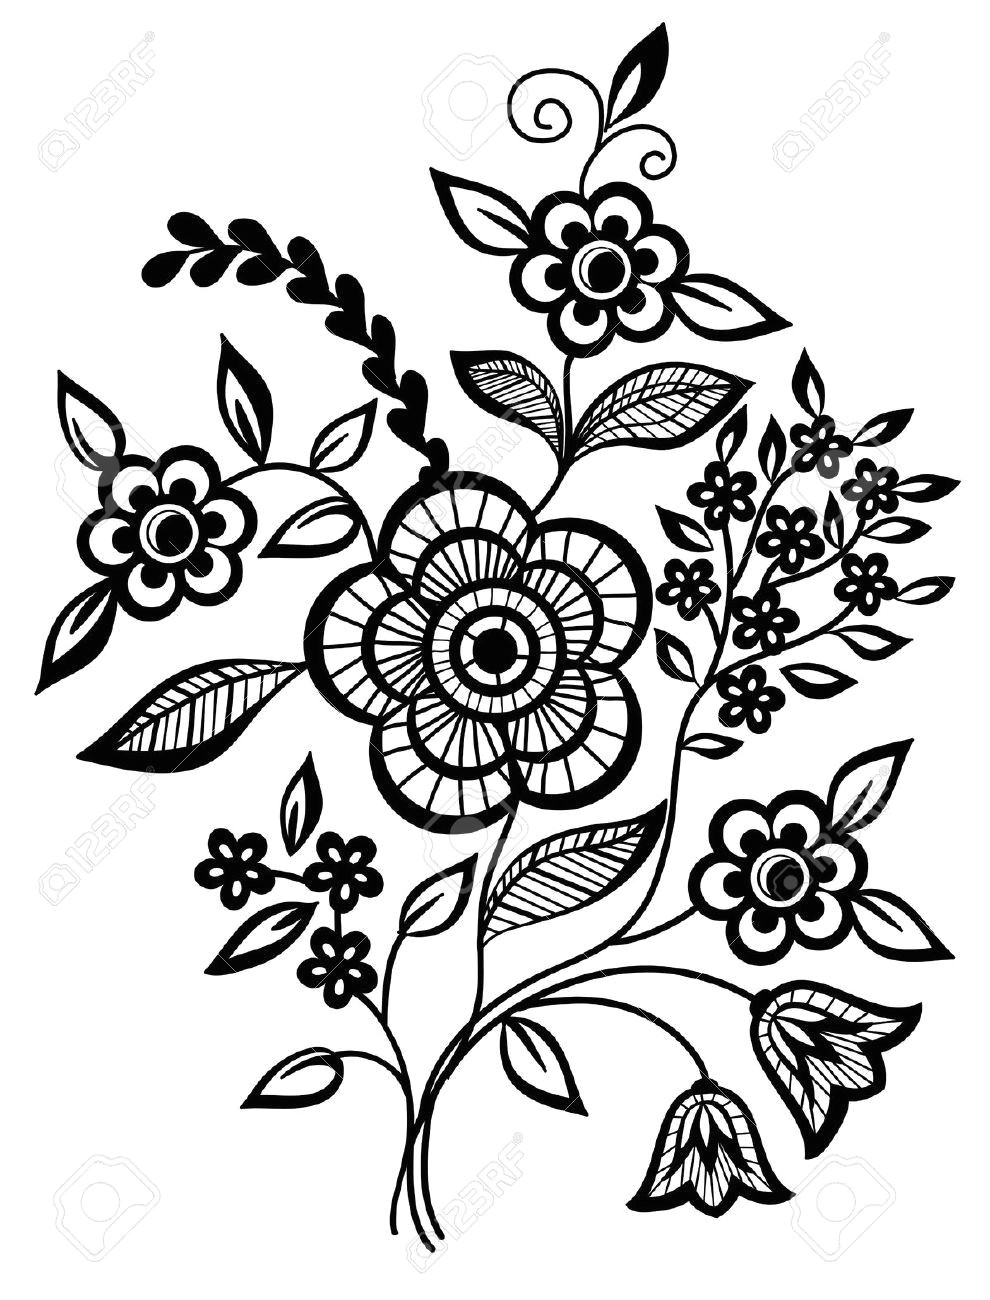 black and white flowers and leaves design element royalty free